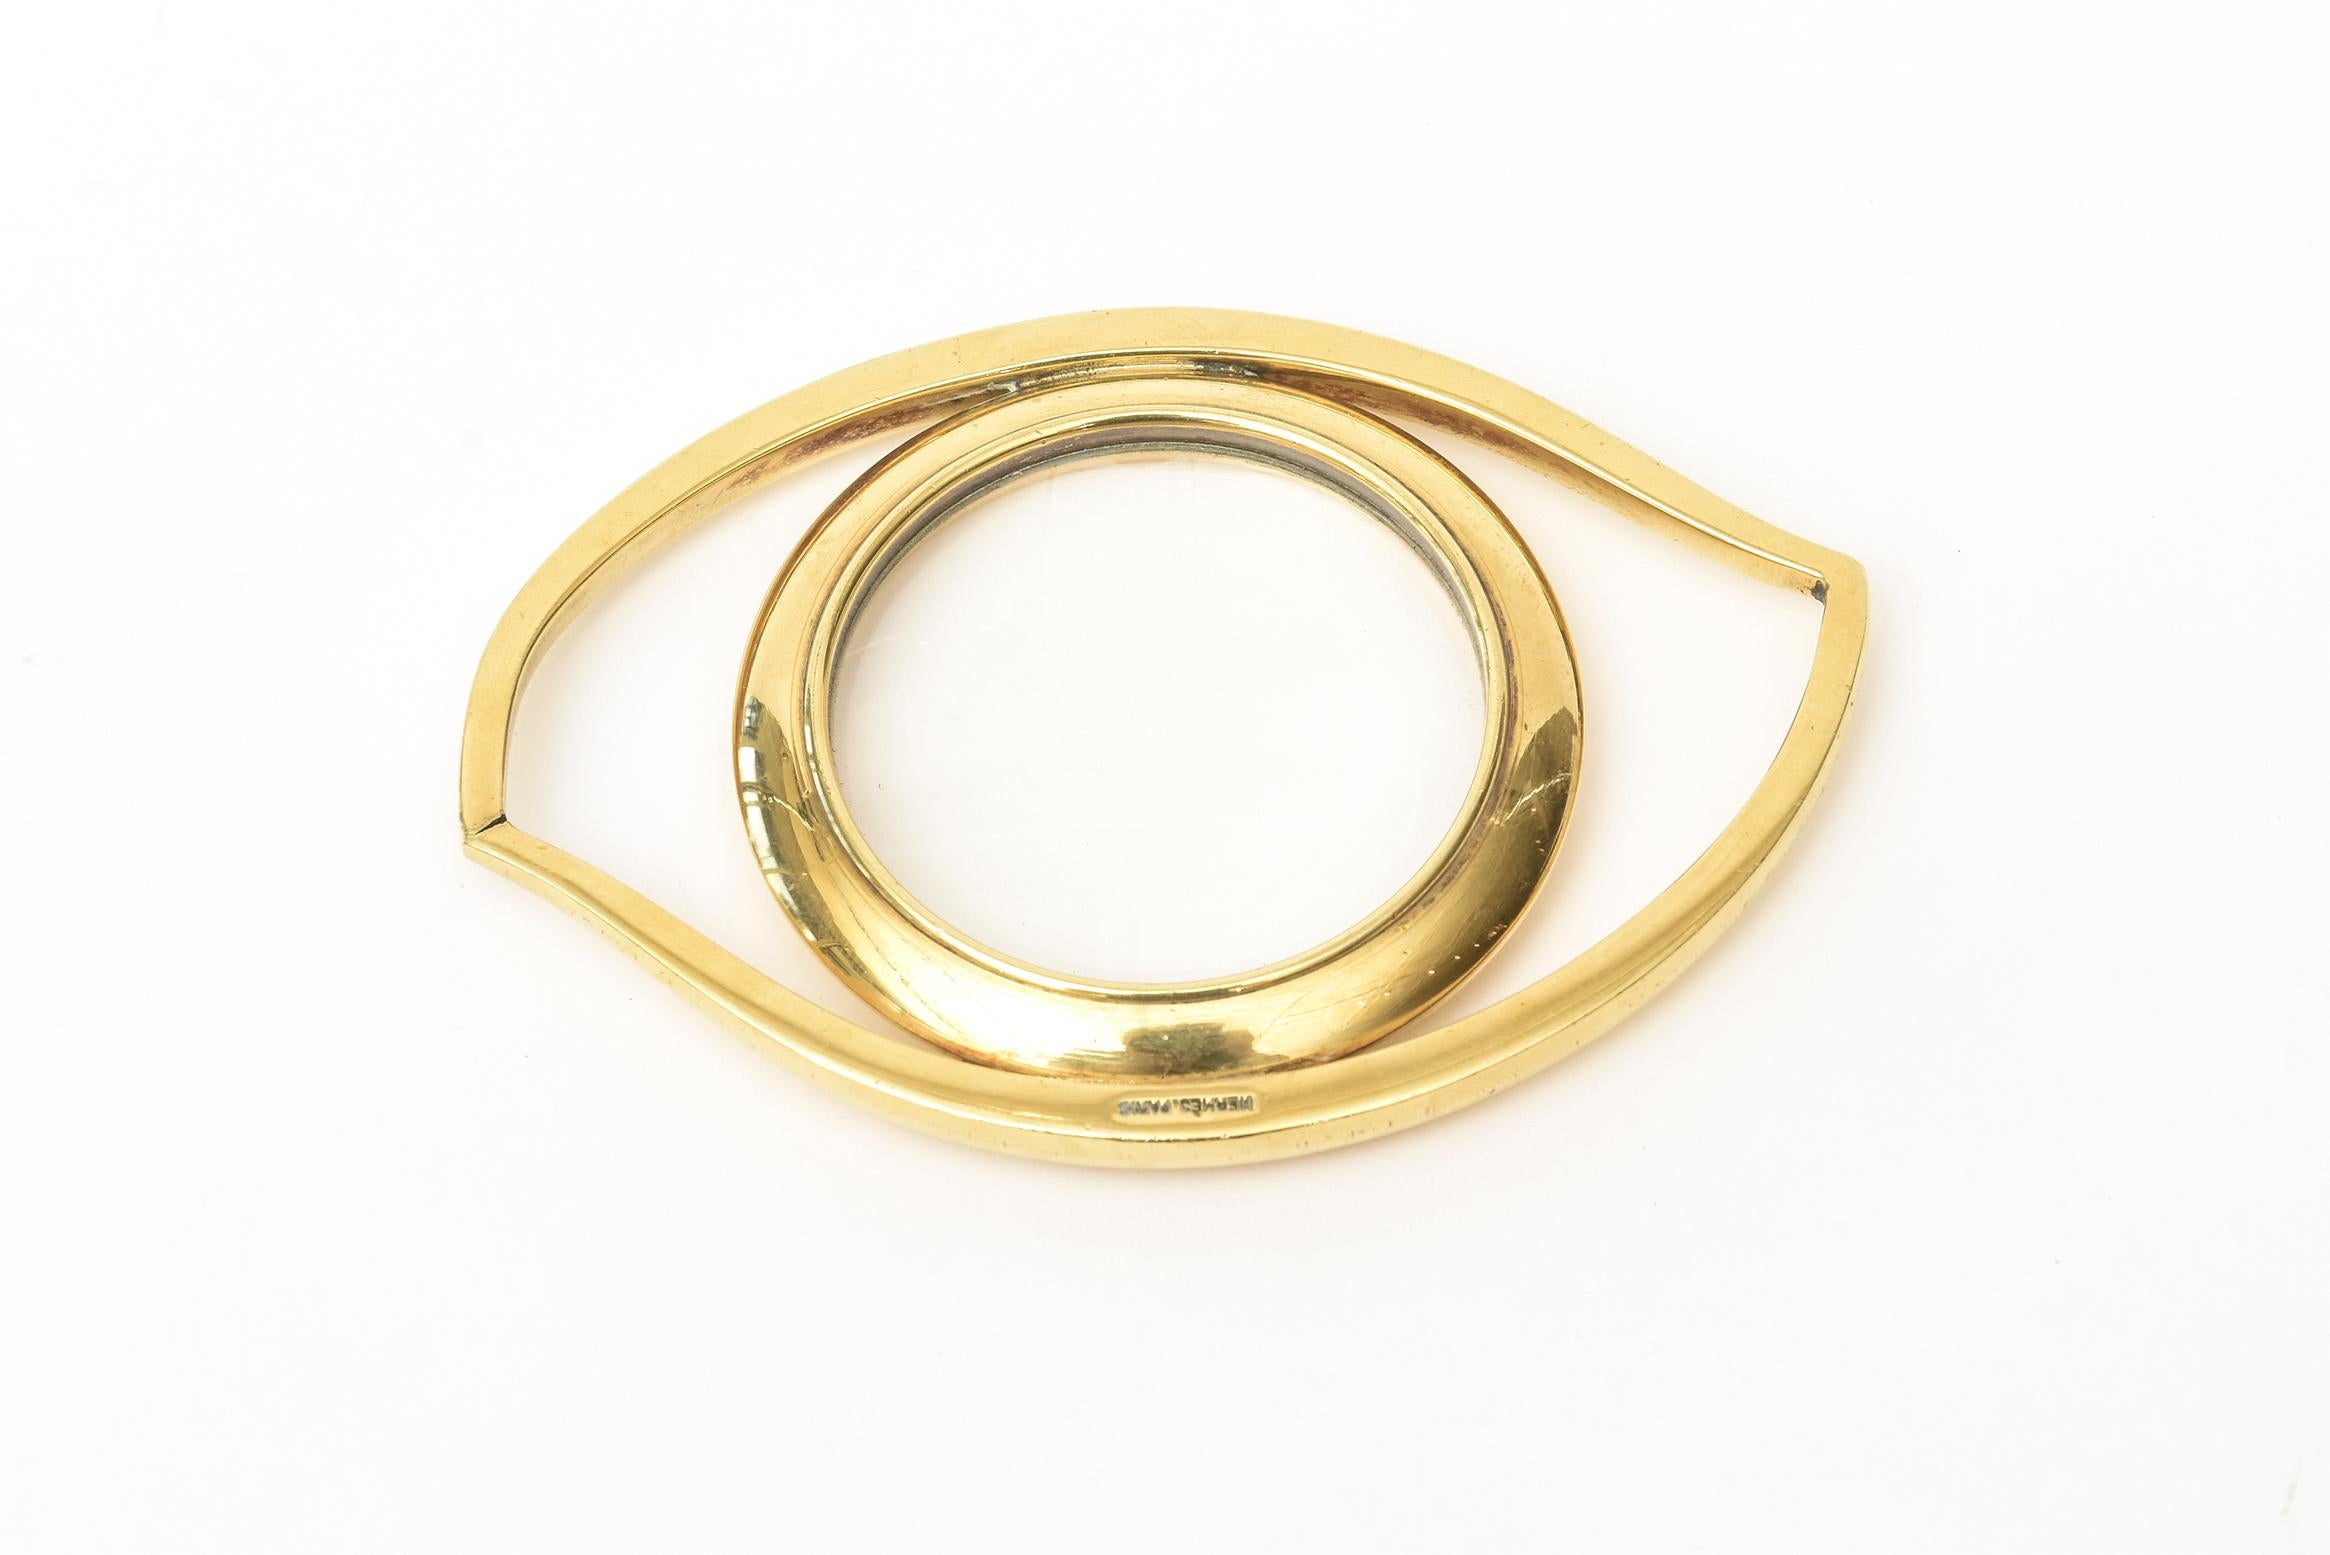 This always conversational and clever signed Hermes Cleopatra eye magnifier and or paperweight is gold-plated and glass. It is vintage from the 1960s. It was designed by Jean Cocteau for Hermès in the 1960s. The influence was based on Egyptian